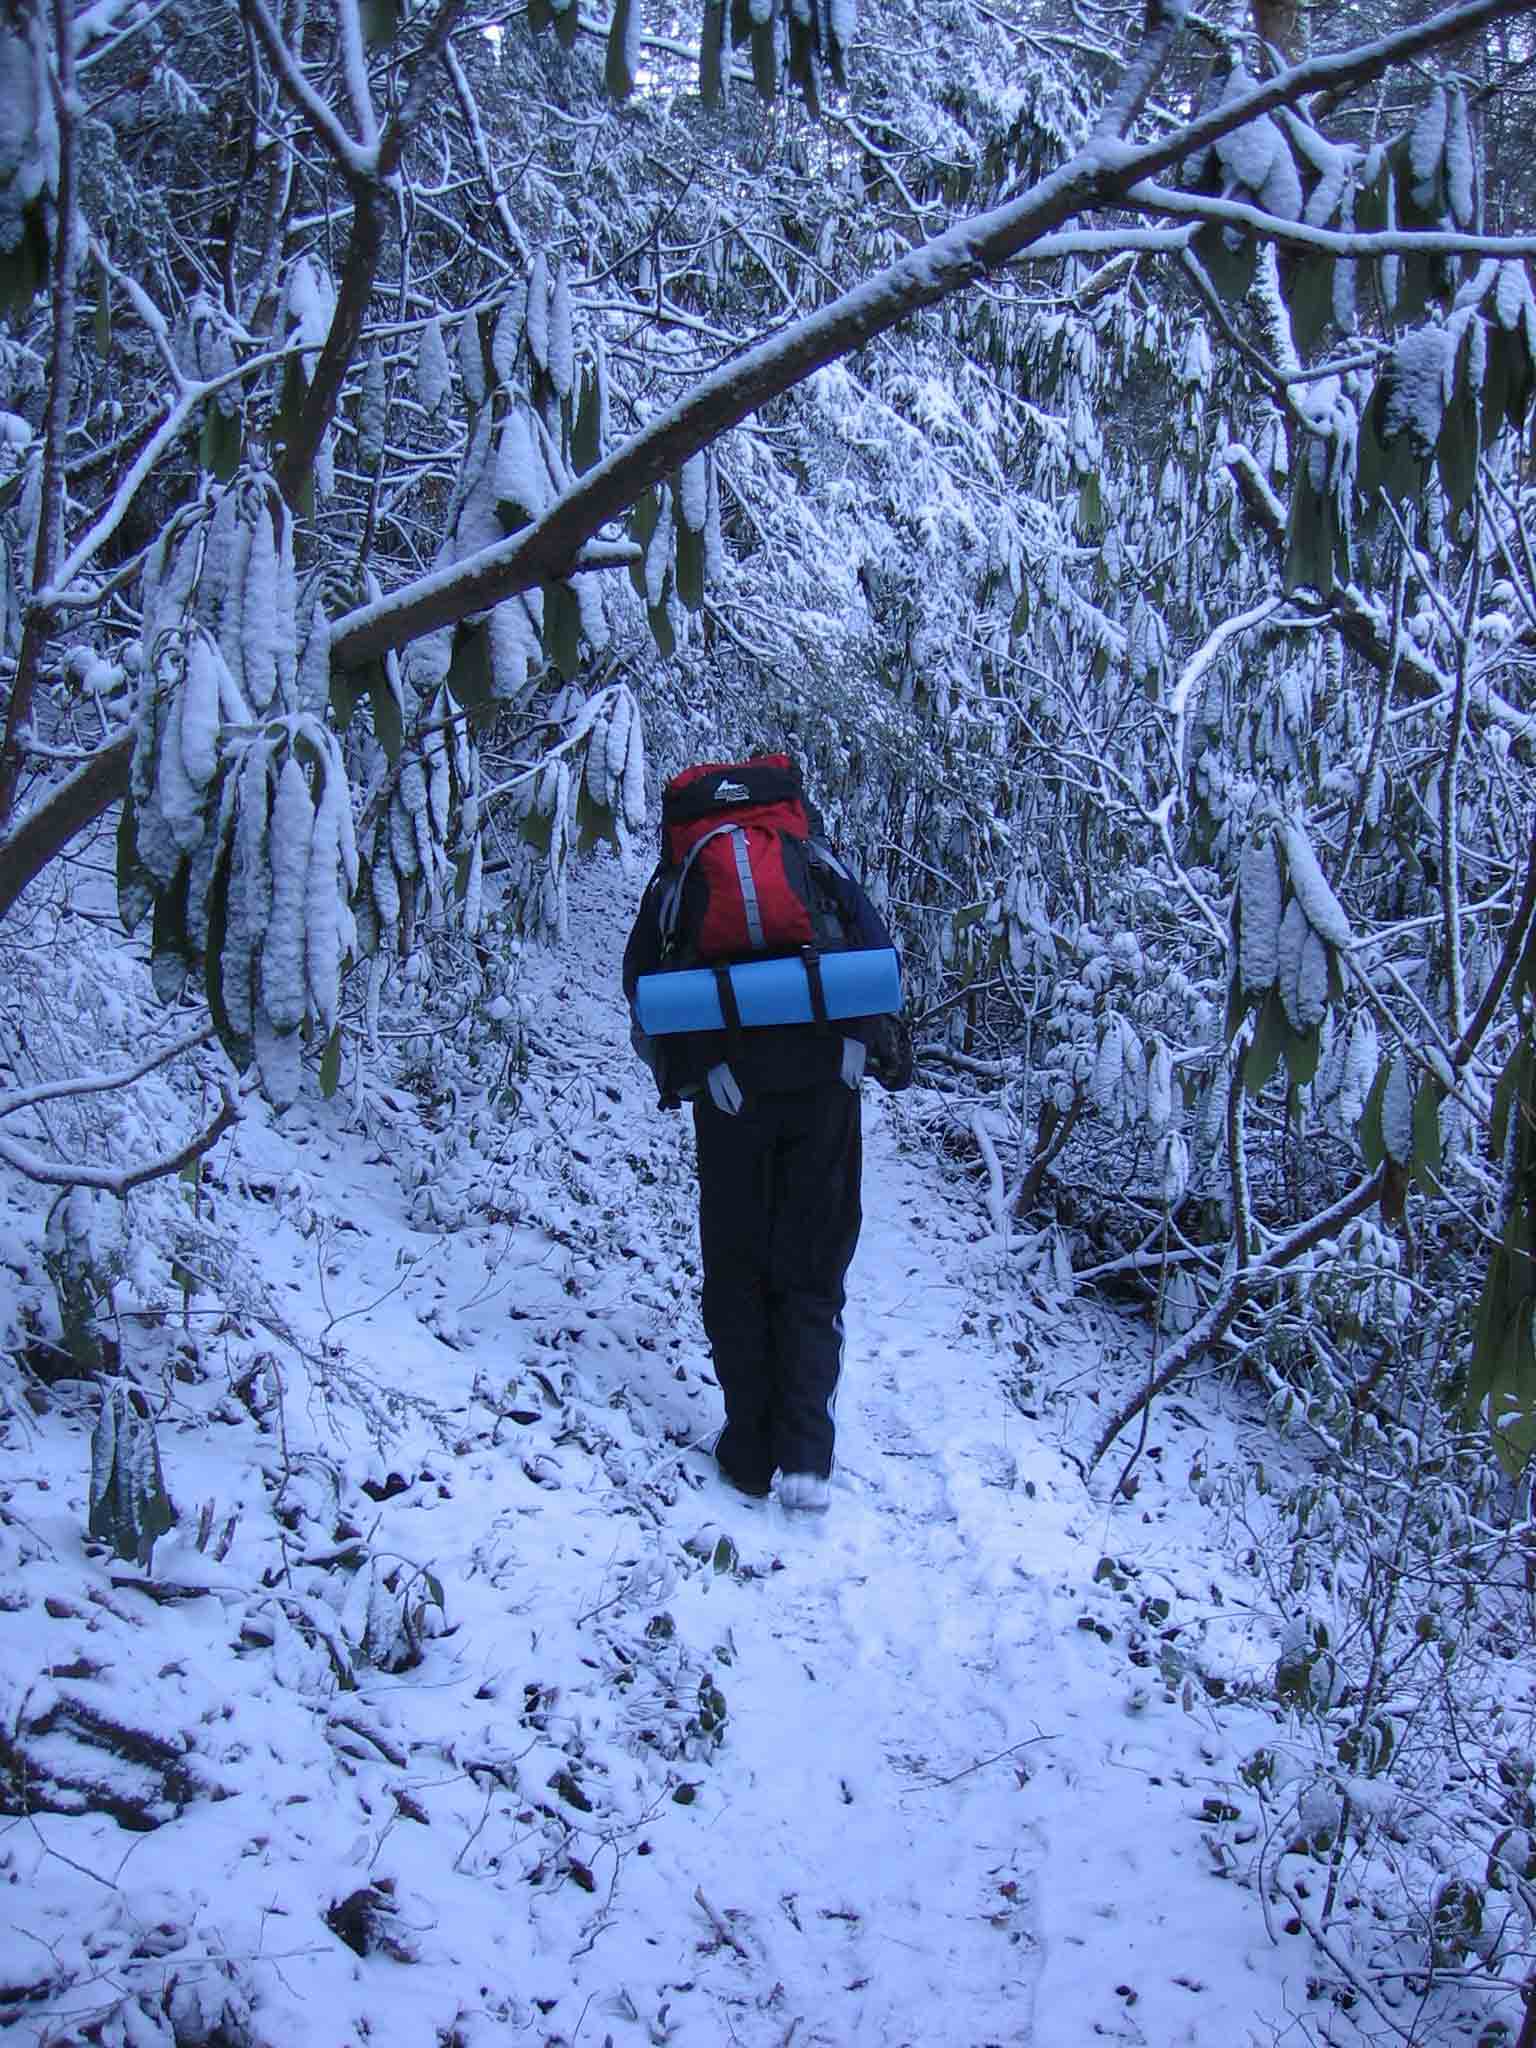 Terry hiking in the snow to Big Spring Shelter. 12/26/06.  Courtesy dsouth@mac.com